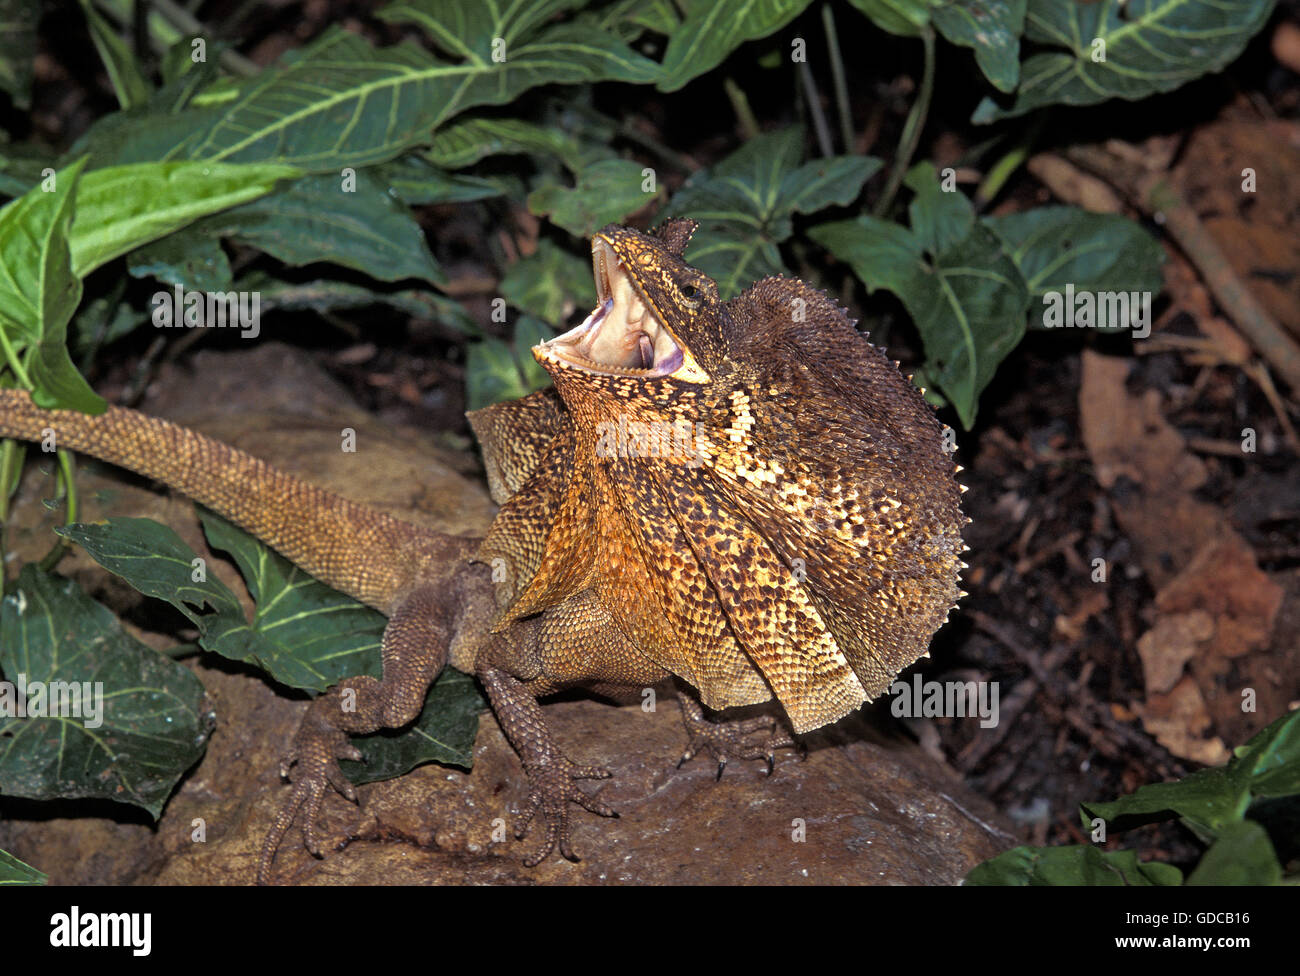 FRILL NECKED LIZARD chlamydosaurus kingii, ADULT WITH FRILL RAISED AND OPEN MOUTH IN DEFENSIVE POSTURE, AUSTRALIA Stock Photo